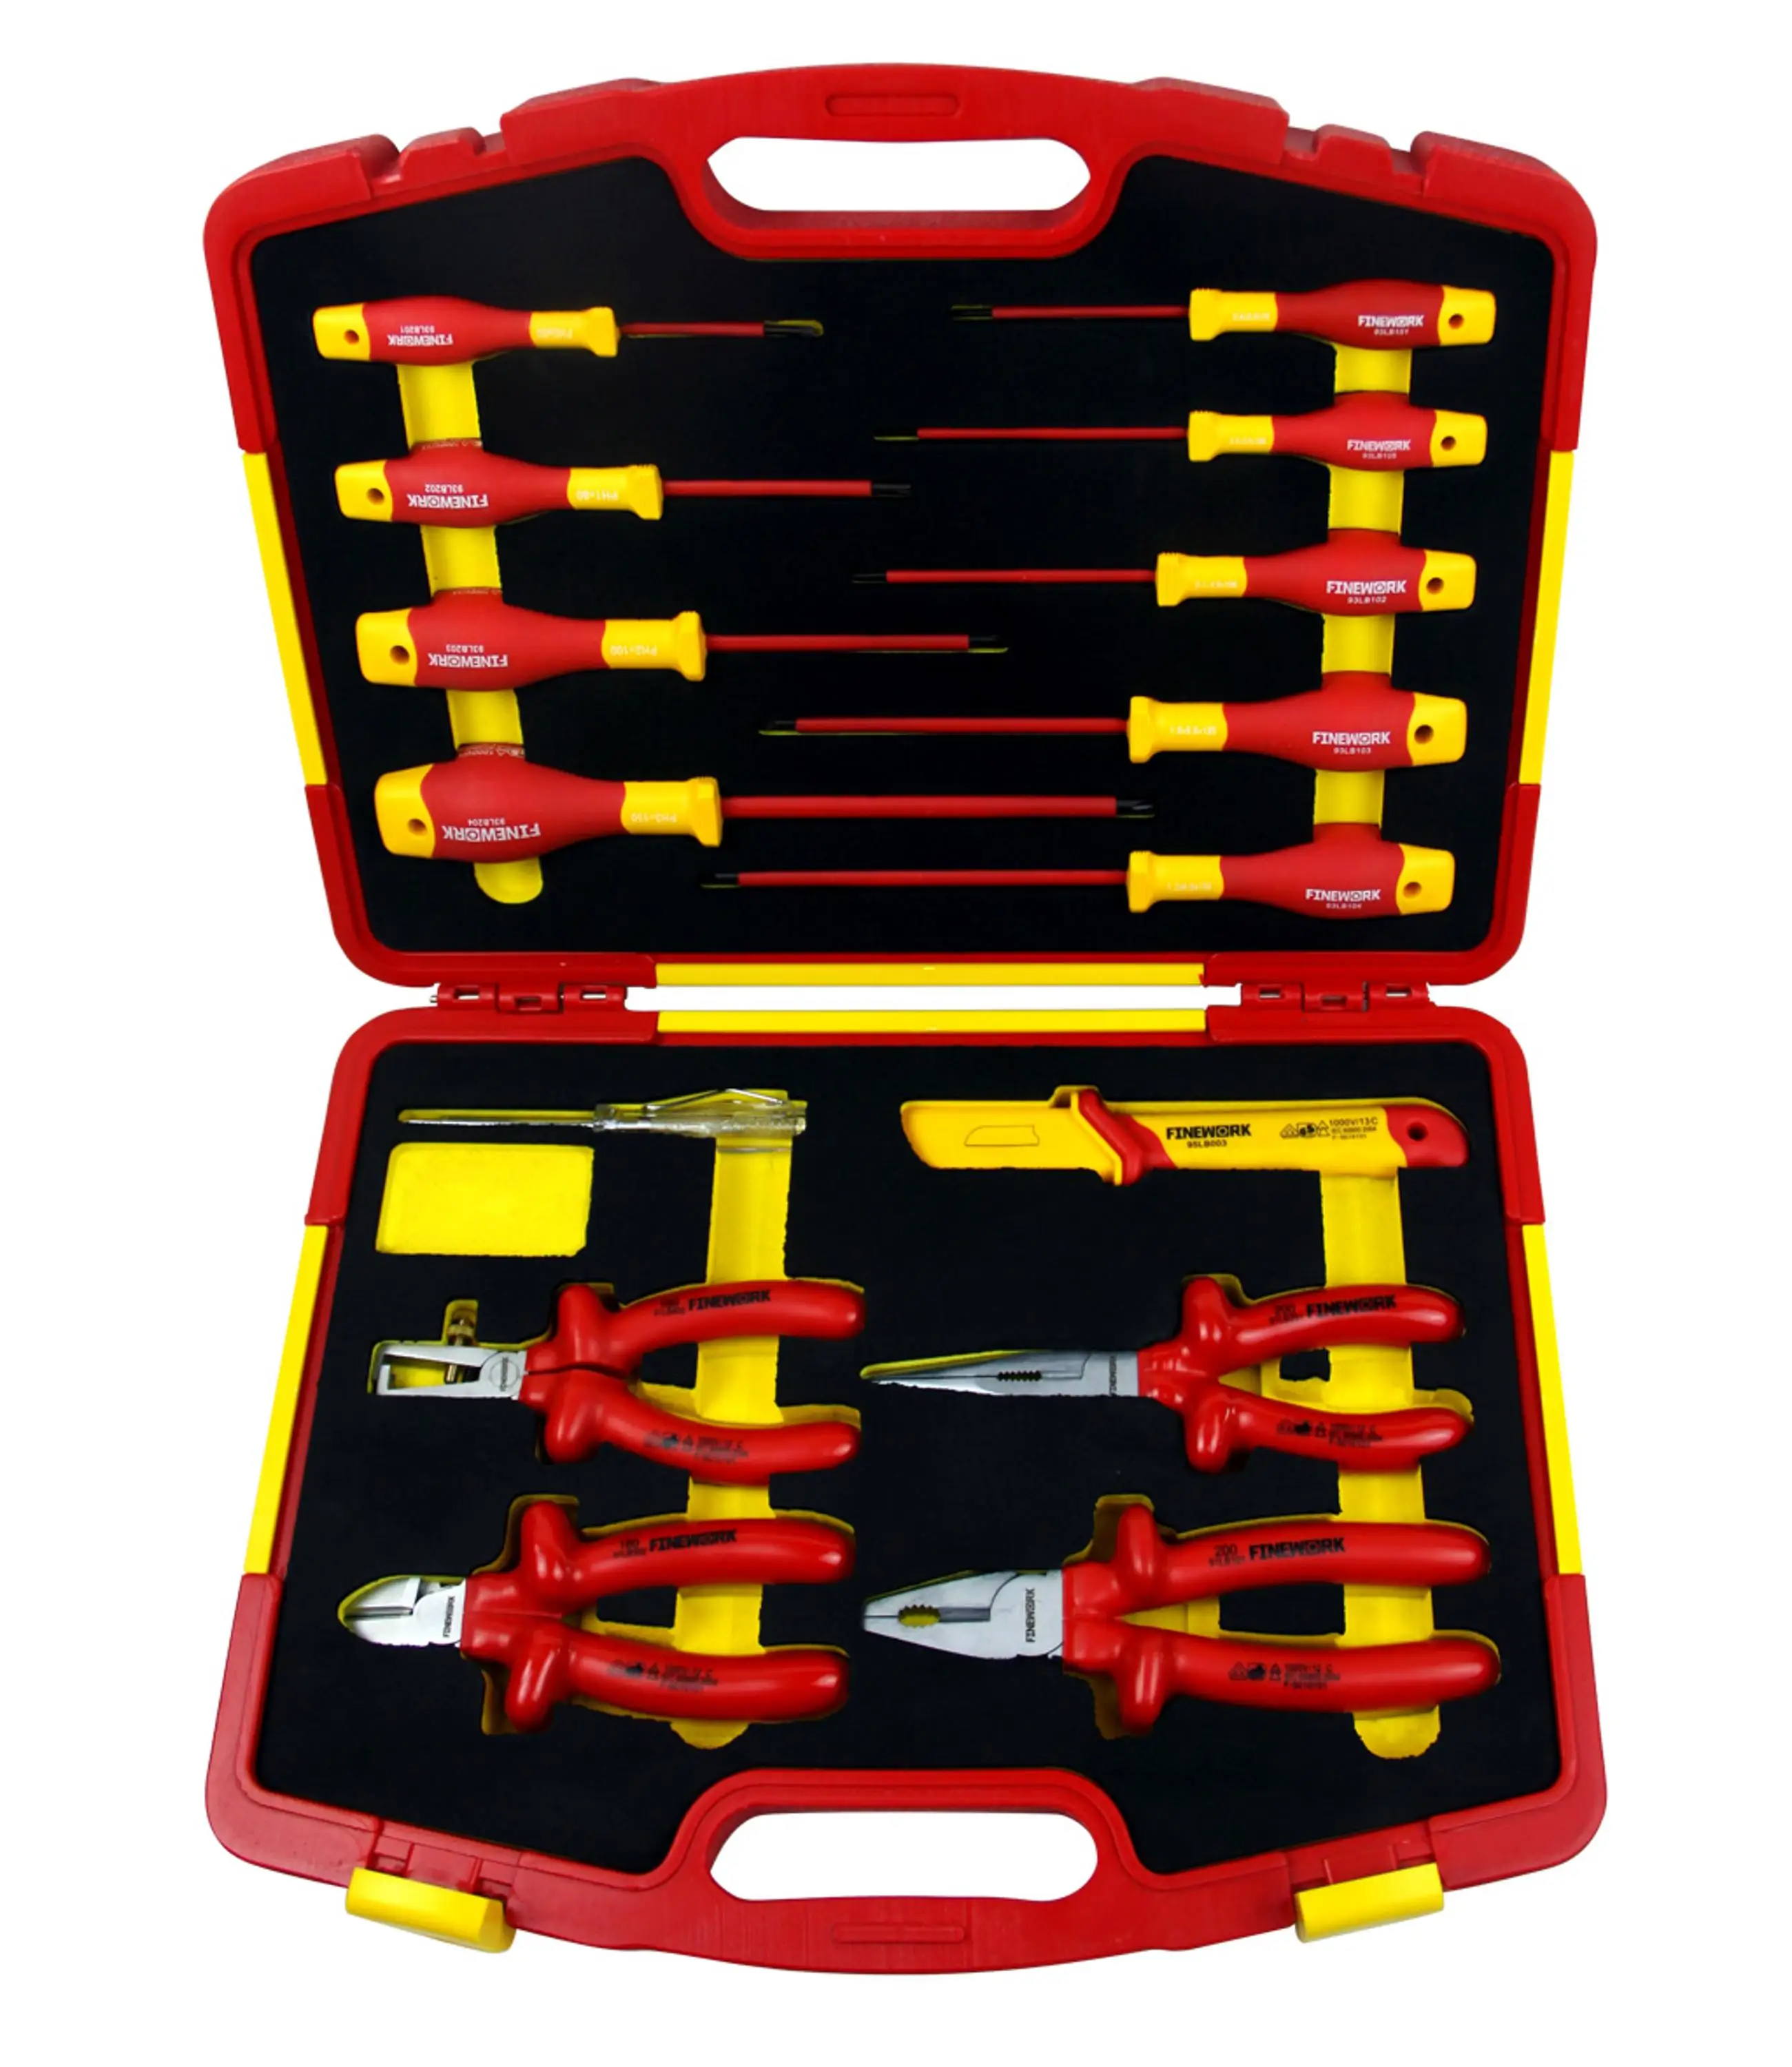 1000v Industrial Insulated Tools Set